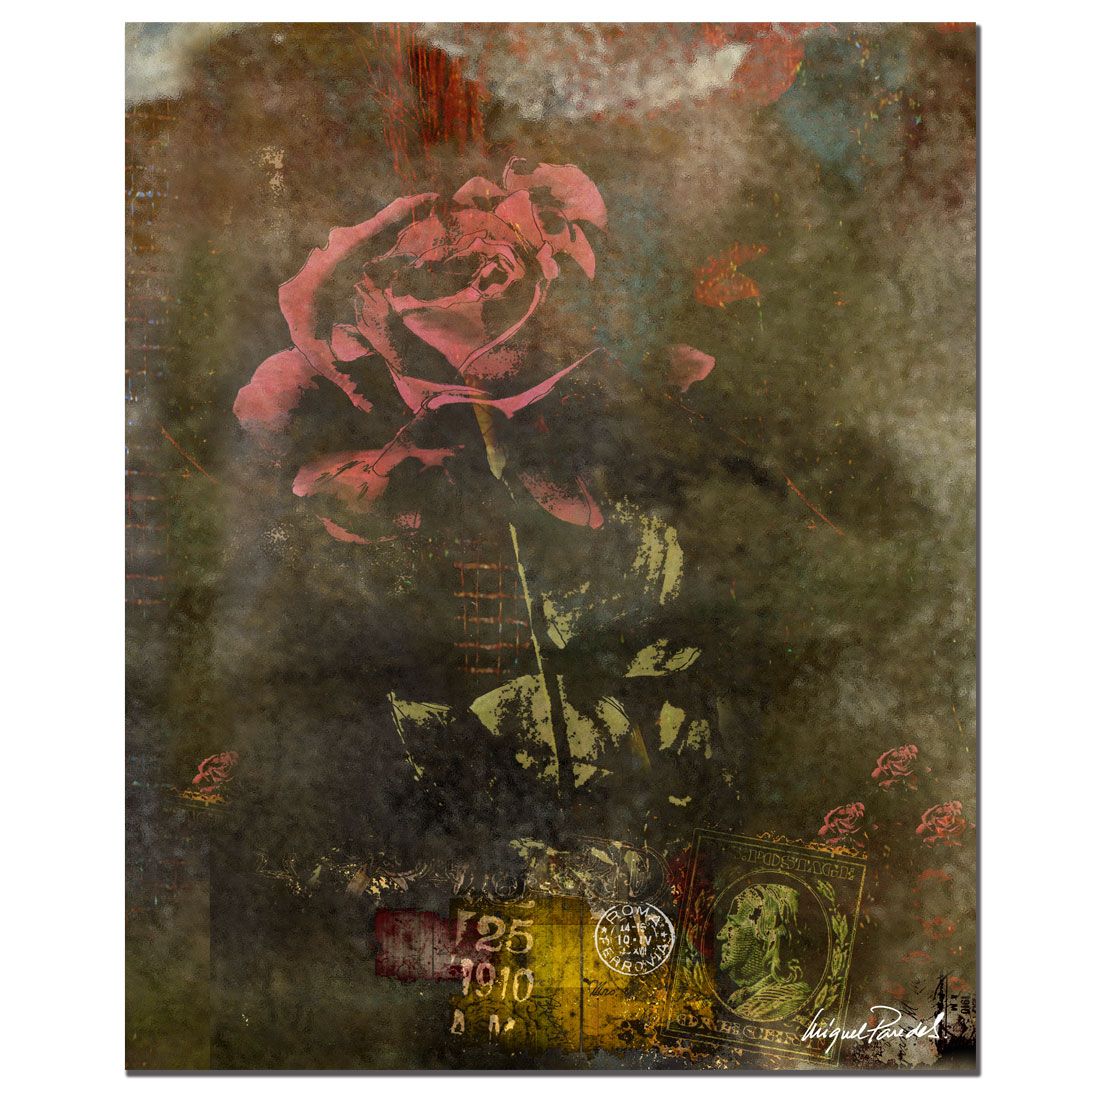 0844296075331 - 26X32 INCHES CLASSIC ROSE I BY MIGUEL PAREDES